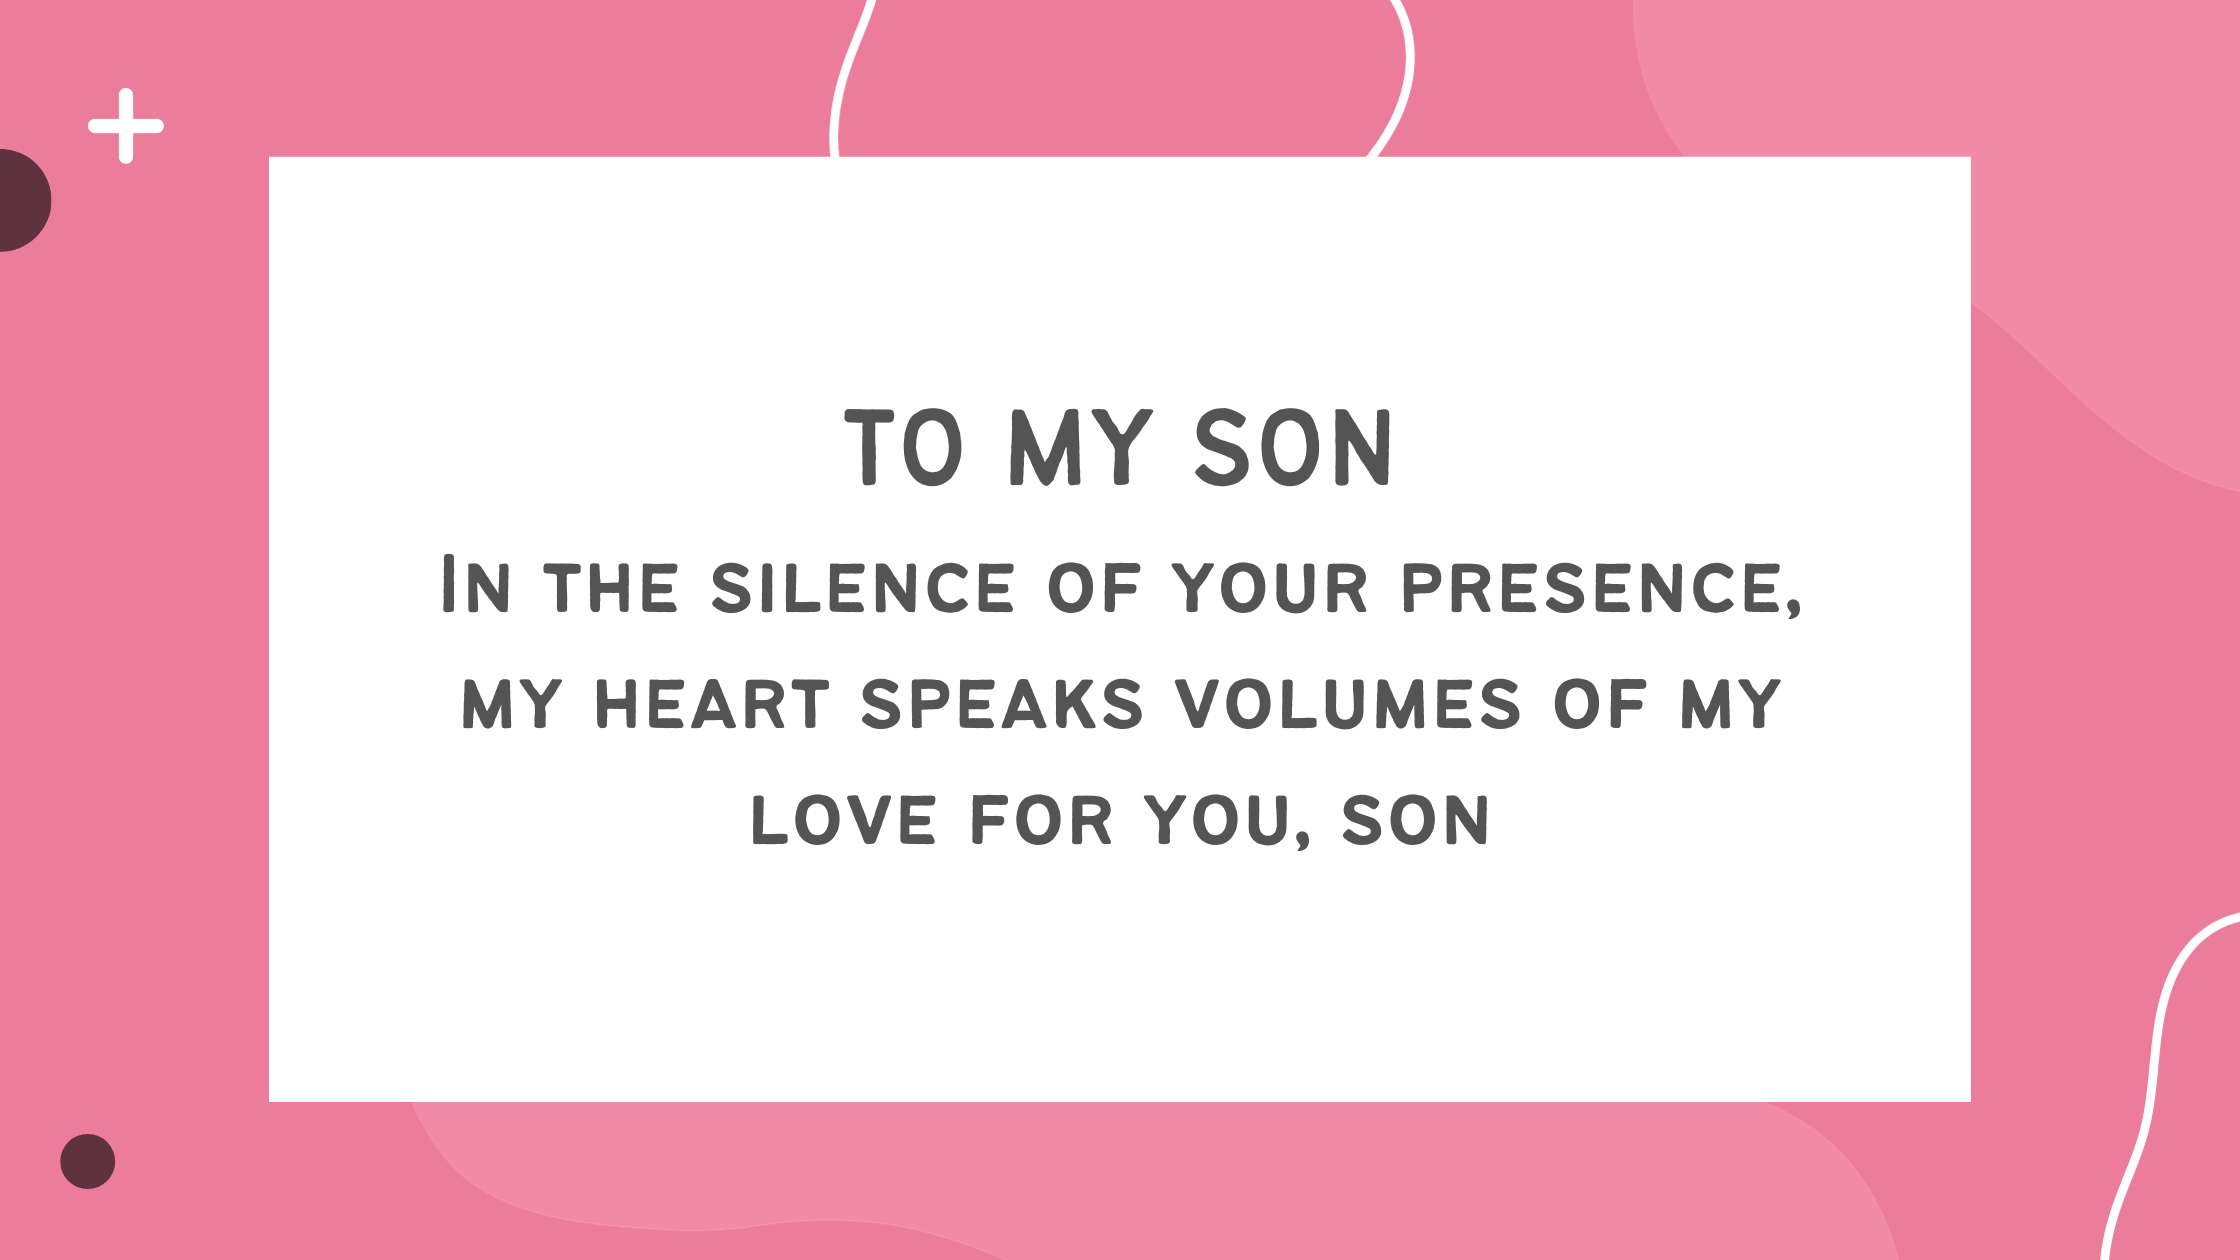 10 Short Loving Words to My Son From His Dad